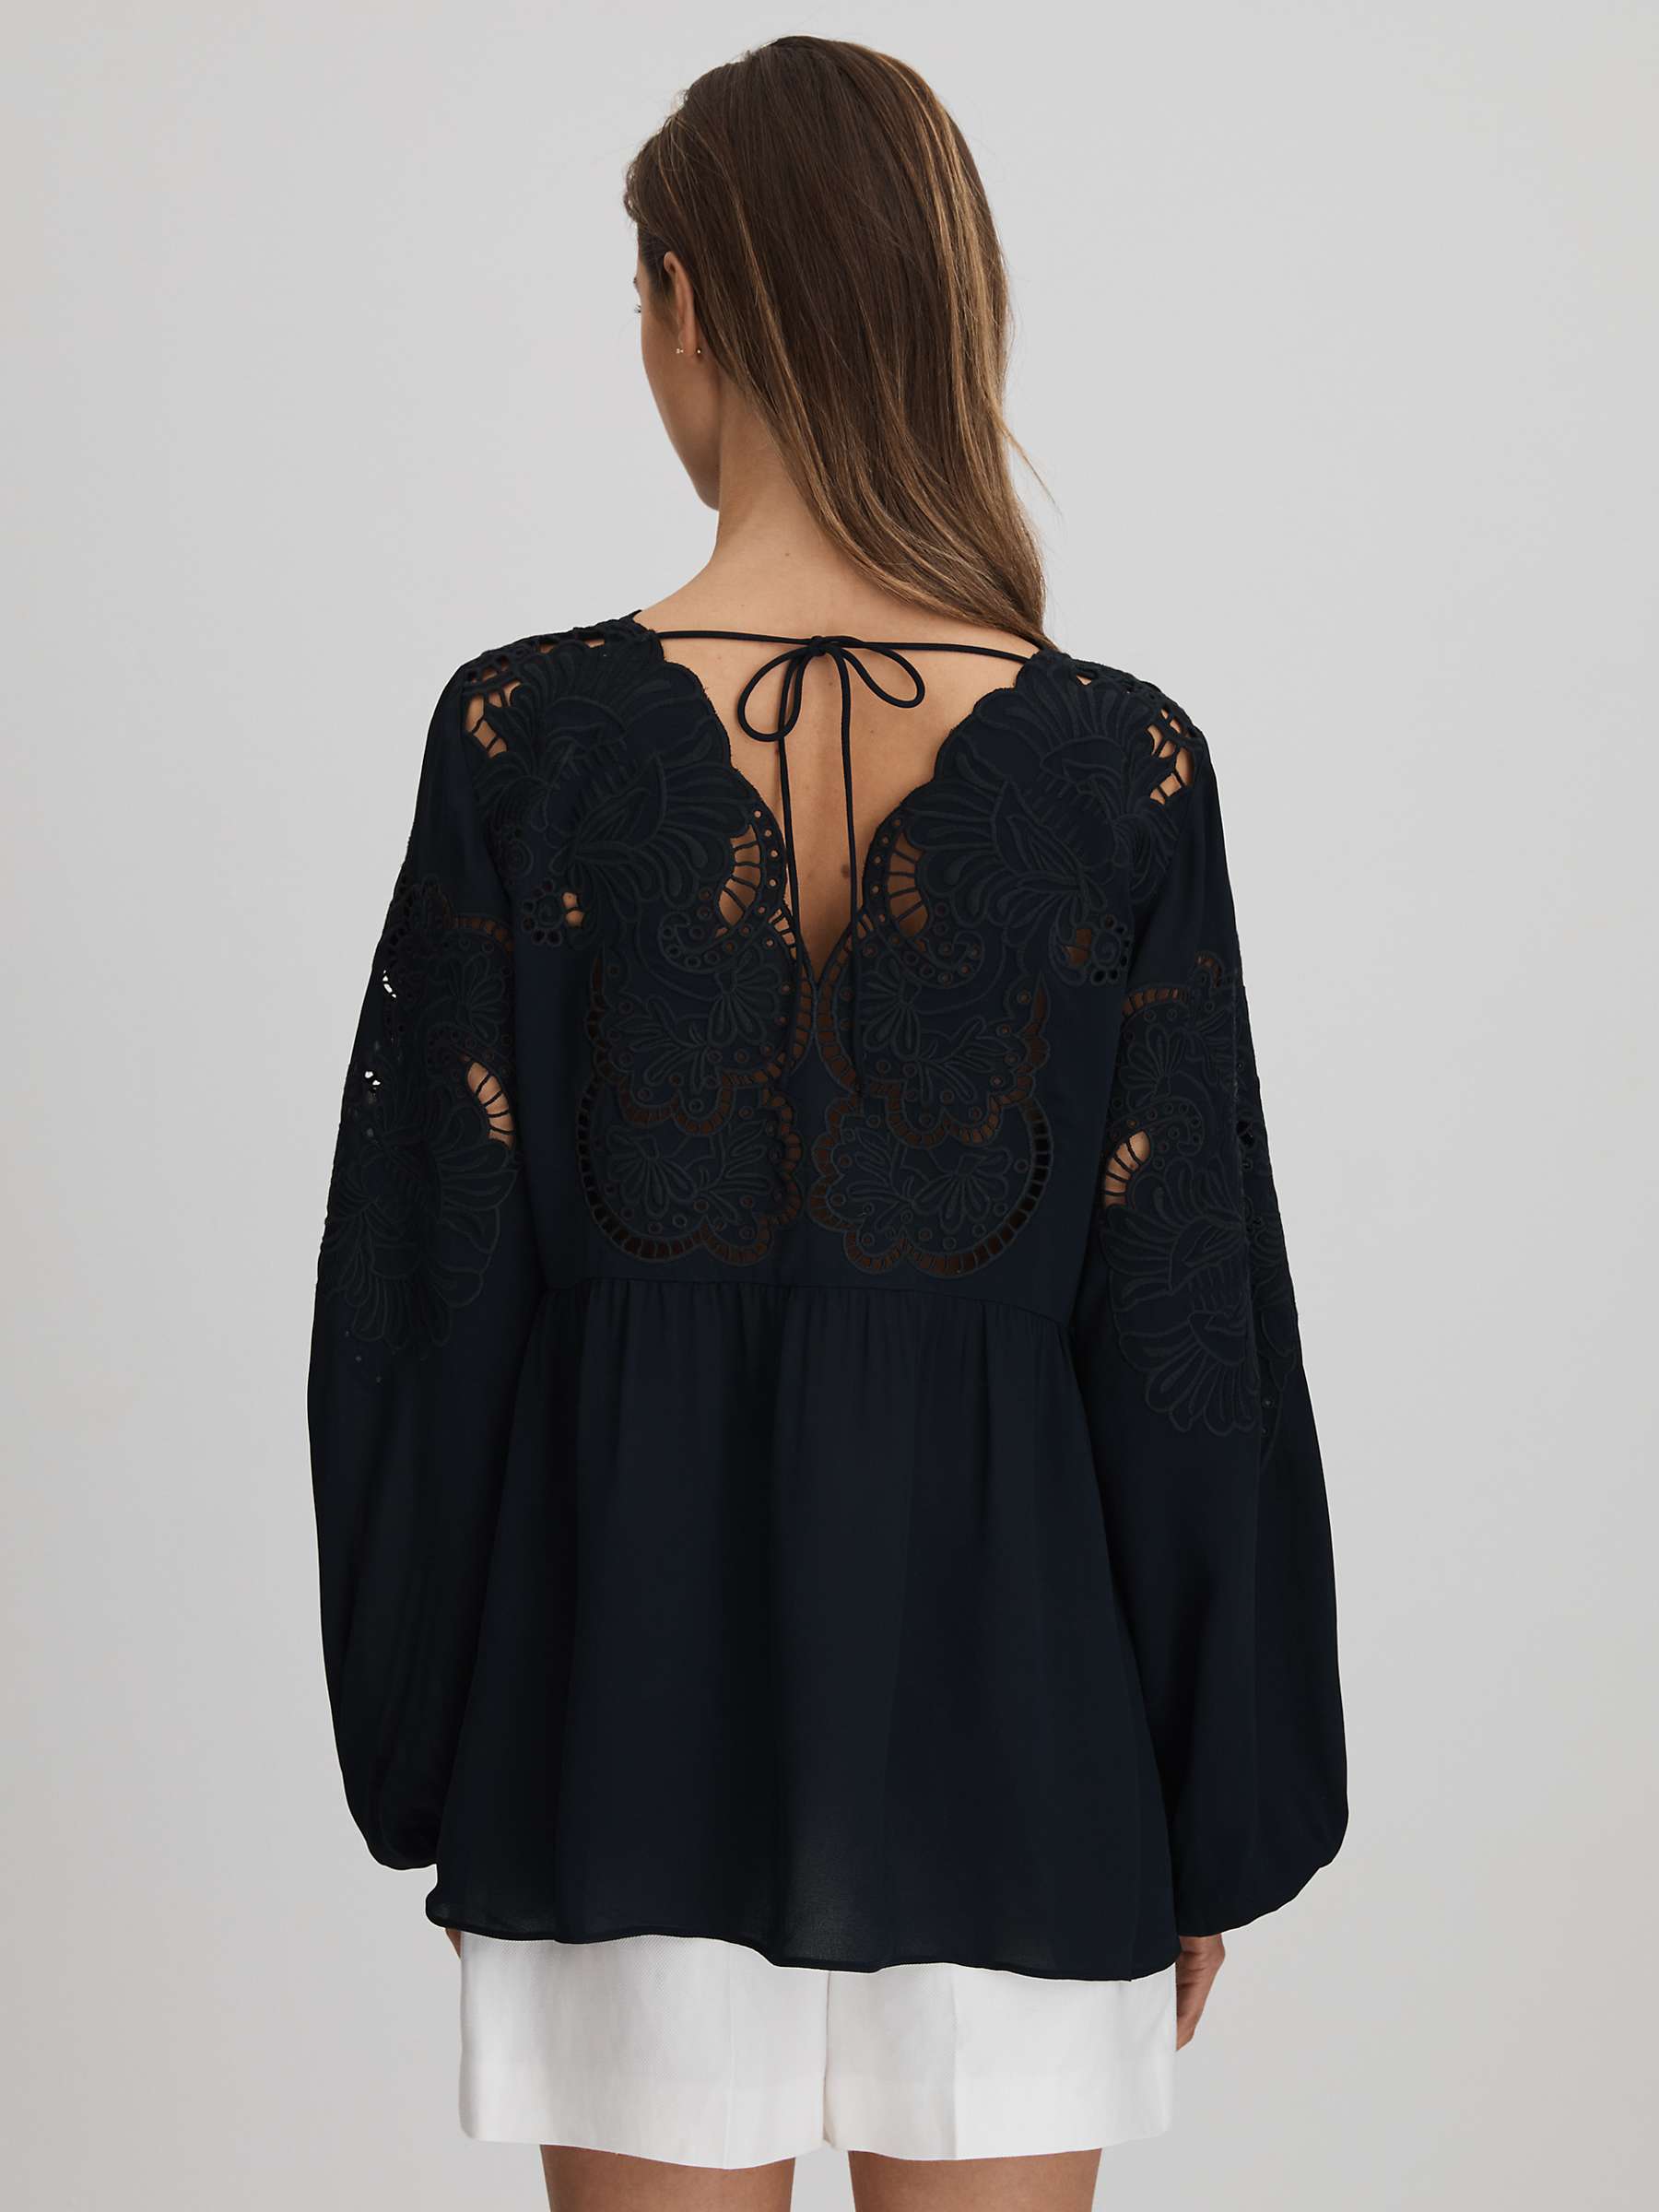 Buy Reiss Noa Lace Insert Blouse, Navy Online at johnlewis.com